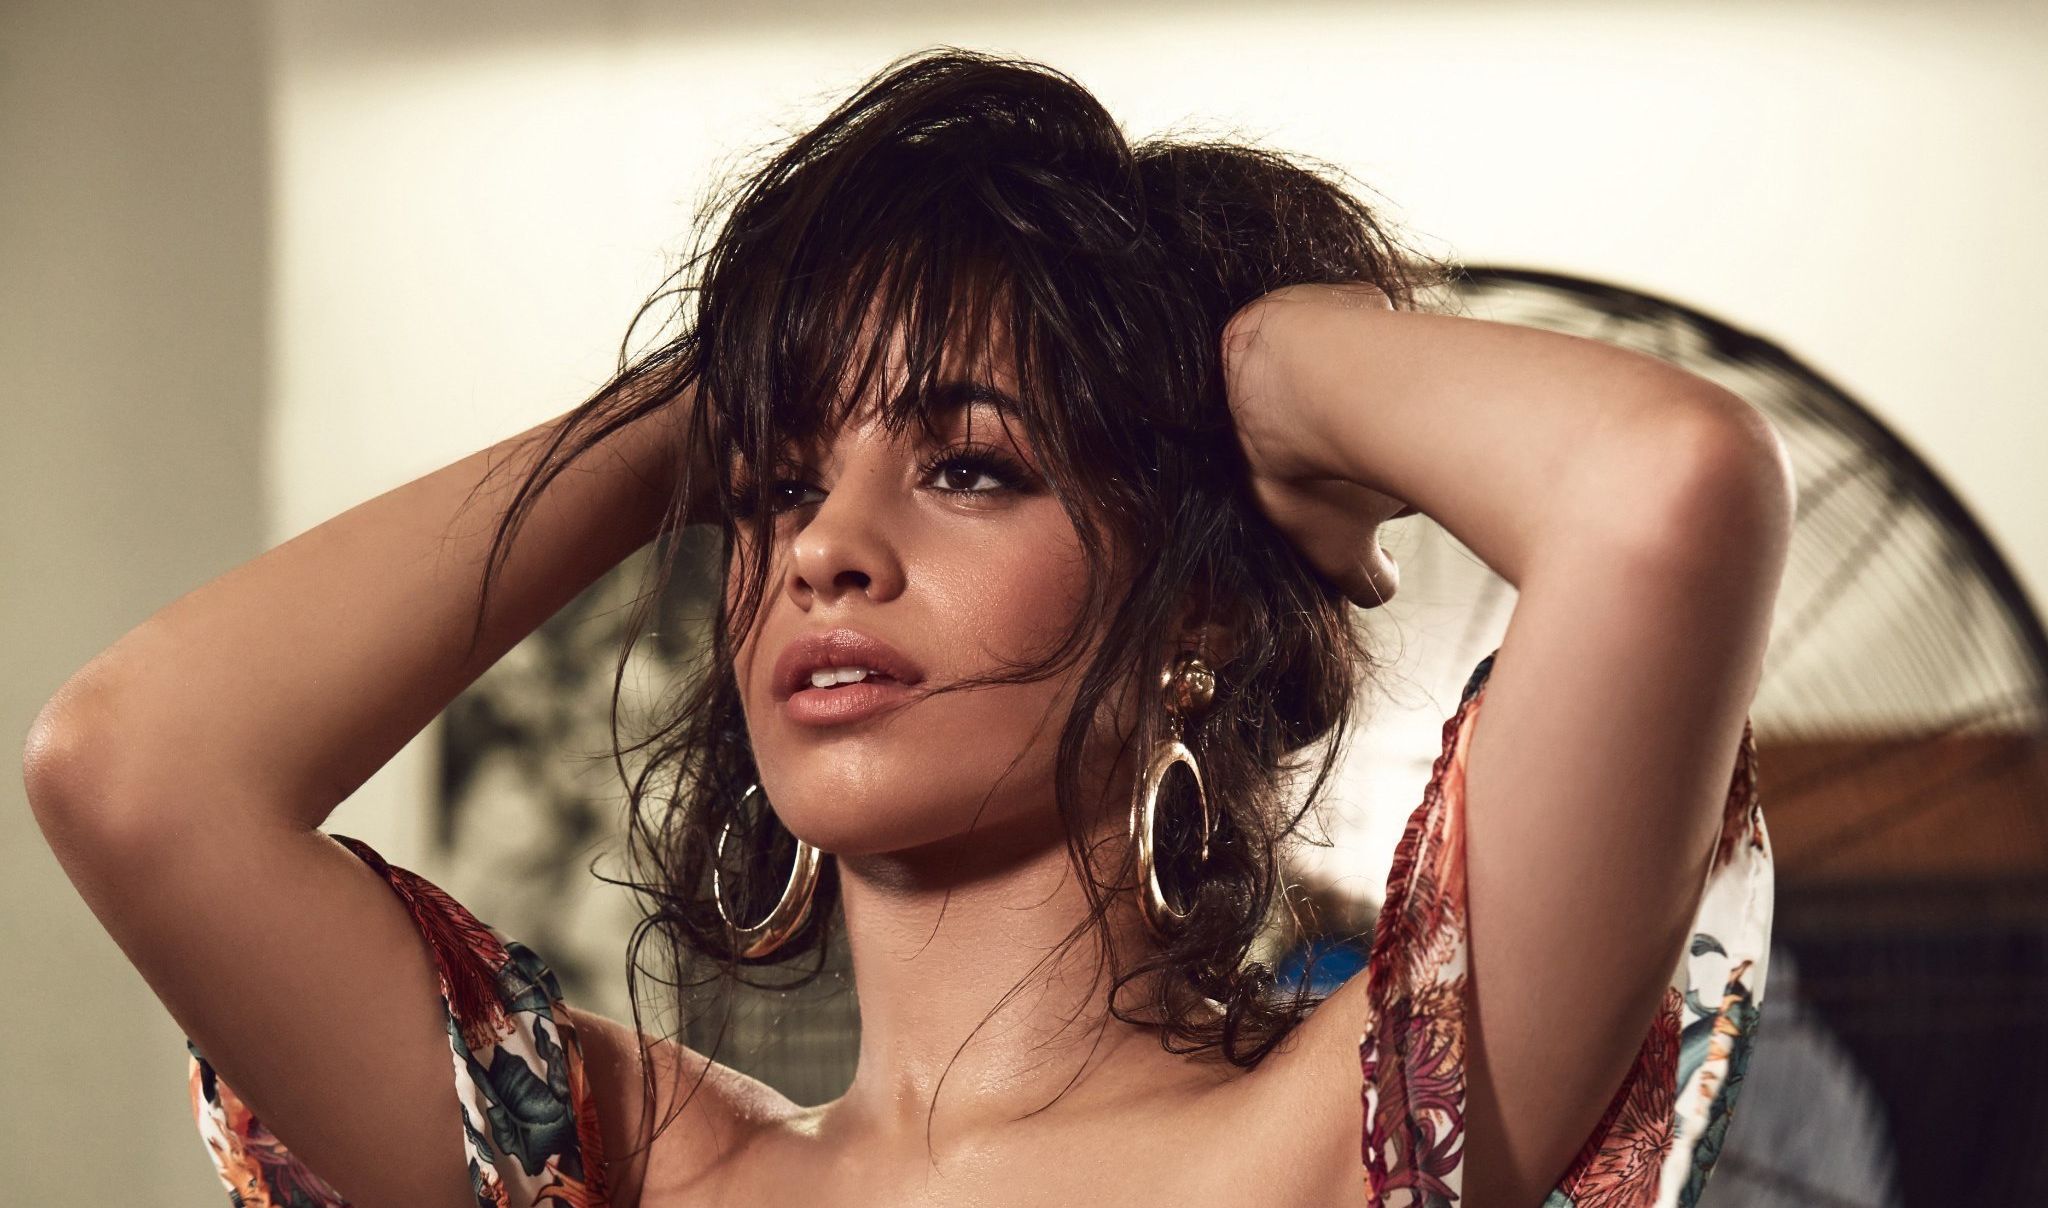 http://bmd.black/wp-content/uploads/2017/12/camila-cabello-real-friends.jpeg